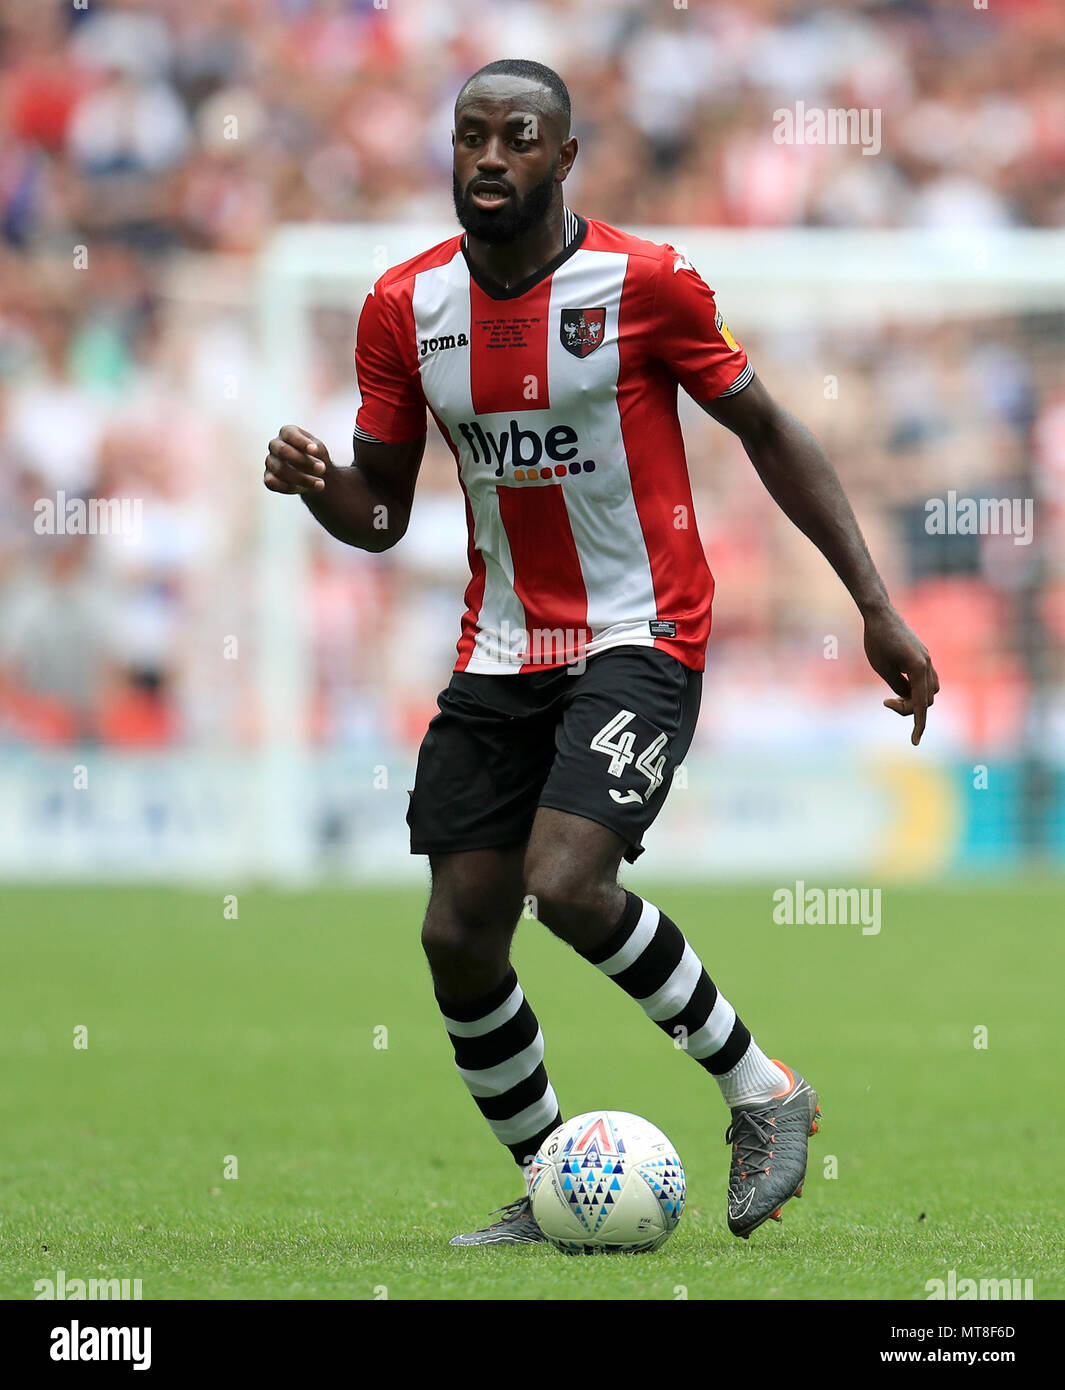 Exeter City's Hiram Boateng during the Sky Bet League Two Final at Wembley Stadium, London. PRESS ASSOCIATION Photo. Picture date: Monday May 28, 2018. See PA story SOCCER League Two. Photo credit should read: Mike Egerton/PA Wire. RESTRICTIONS: No use with unauthorised audio, video, data, fixture lists, club/league logos or 'live' services. Online in-match use limited to 75 images, no video emulation. No use in betting, games or single club/league/player publications. Stock Photo